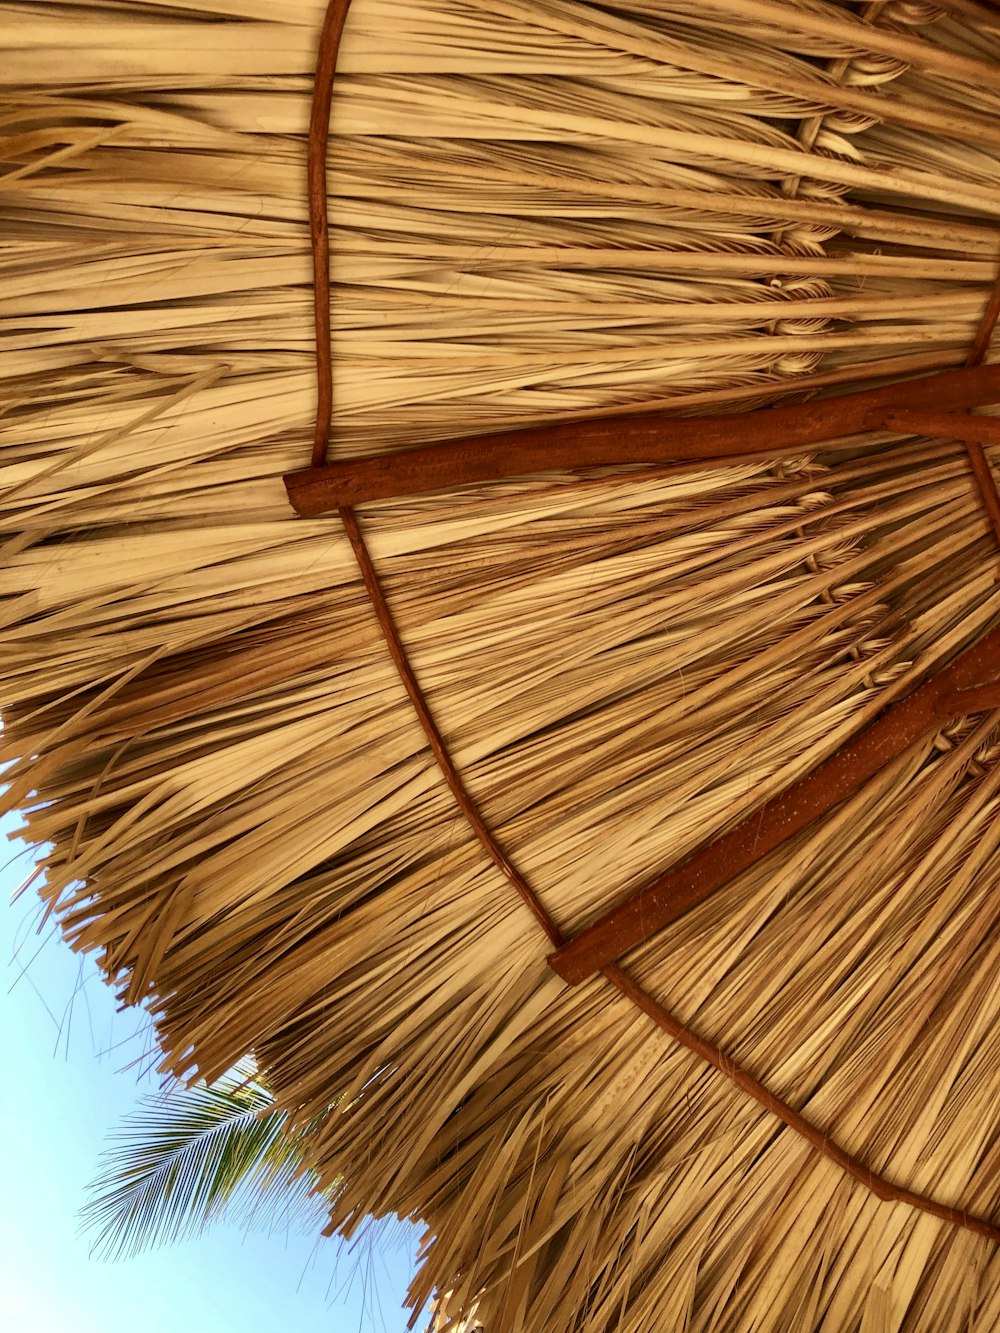 a straw umbrella with a blue sky in the background